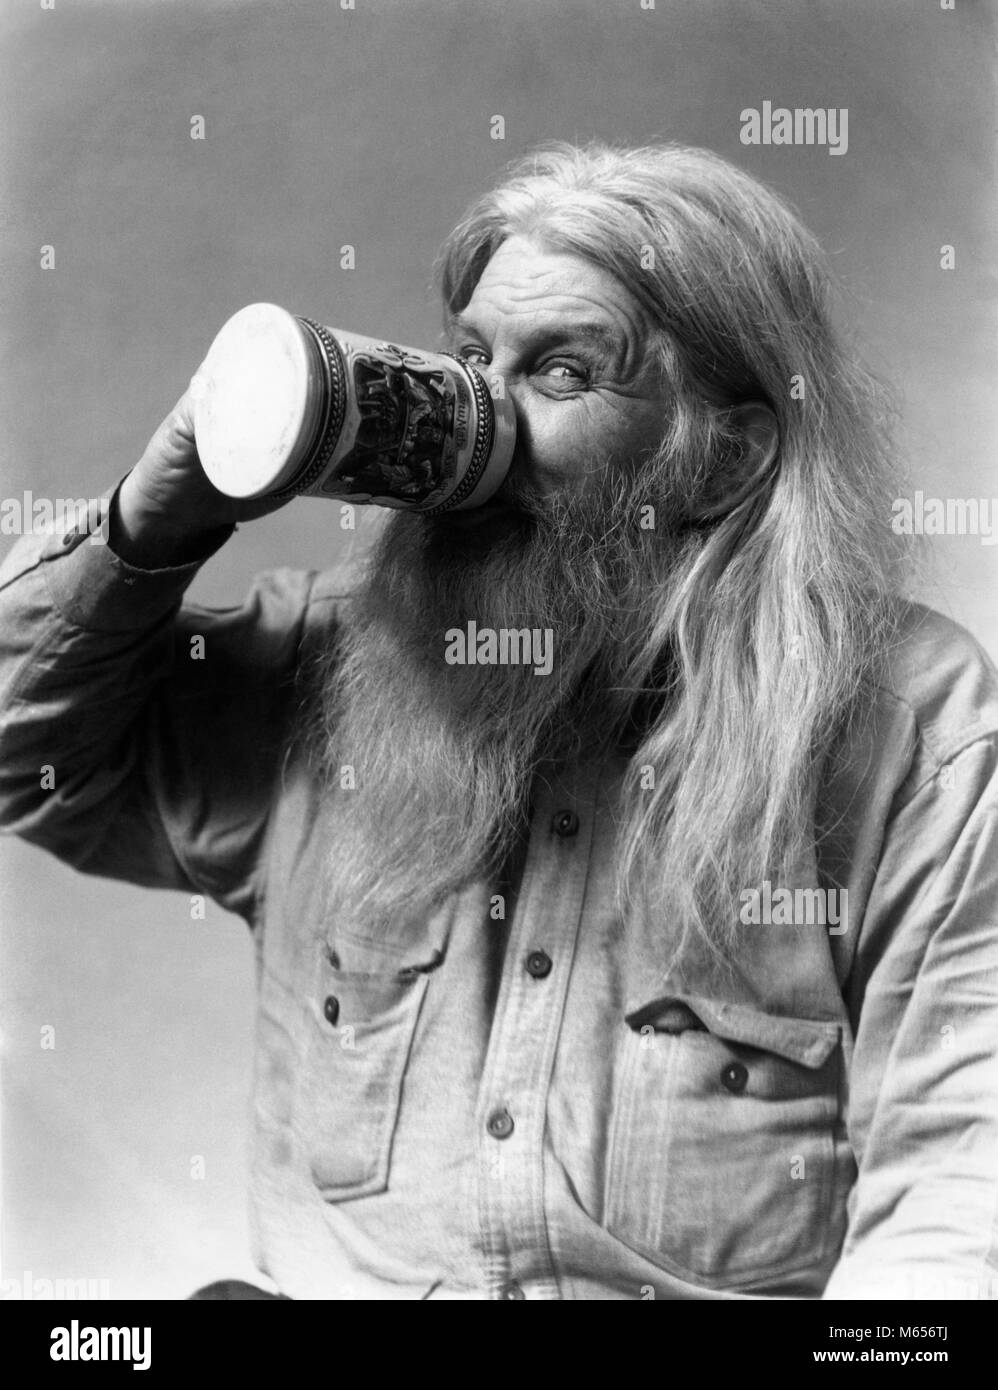 1930s SENIOR MAN CHARACTER WITH SMILING EYES LOOKING AT CAMERA HIRSUTE LONG GRAY BEARD AND HAIR DRINKING BEER FROM STEIN - f7661 HAR001 HARS BEVERAGE FACIAL HAIR BEARDED LONG HAIR HOBO GRAY MALES SCRUFFY B&W BEER STEIN BLACK AND WHITE CAUCASIAN ETHNICITY HAIRY HIRSUTE LOOKING AT CAMERA OLD FASHIONED PERSONS RUMPLED SMILING EYES STEIN UNKEMPT Stock Photo